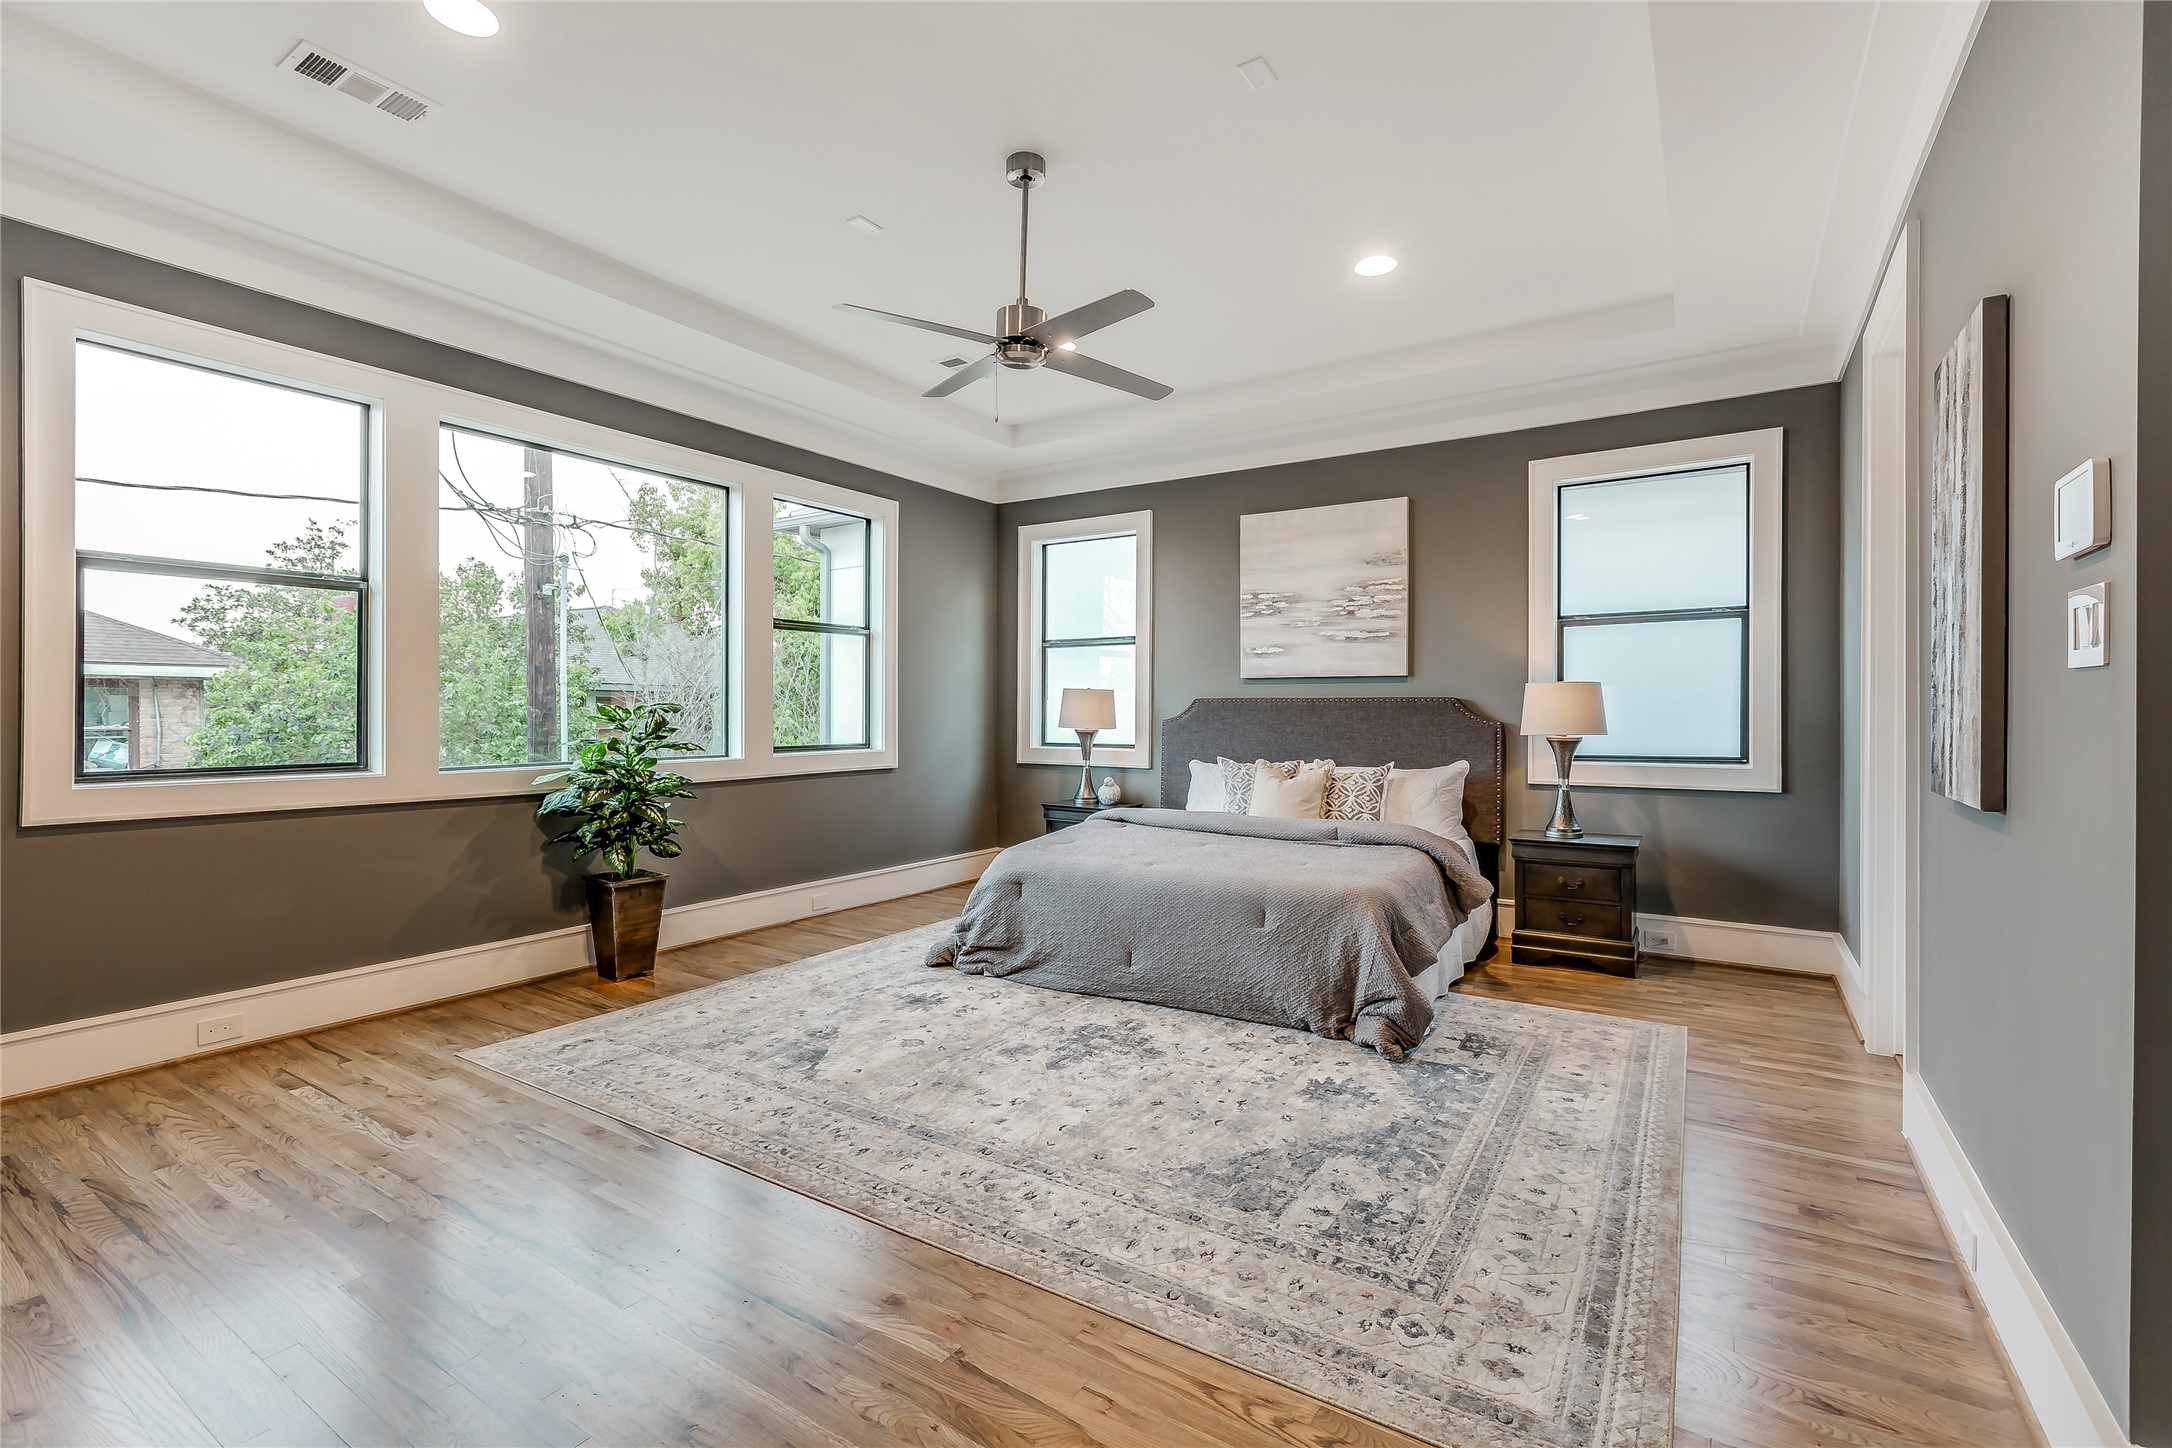 ASK ABOUT CUSTOMIZATION OPTIONS DURING CONSTRUCTION ONLY * MODEL HOME * PHOTOS MAY SHOW A SIMILAR FLOOR PLAN AND/OR UPGRADED/ALTERNATIVE FINISHES * Please use these photos as a guide *THIS IS AN ACTIVE CONSTRUCTION SITE, BUYERS MUST REQUEST APPOINTMENT TO BE ON PREMISE AT ALL TIMES.